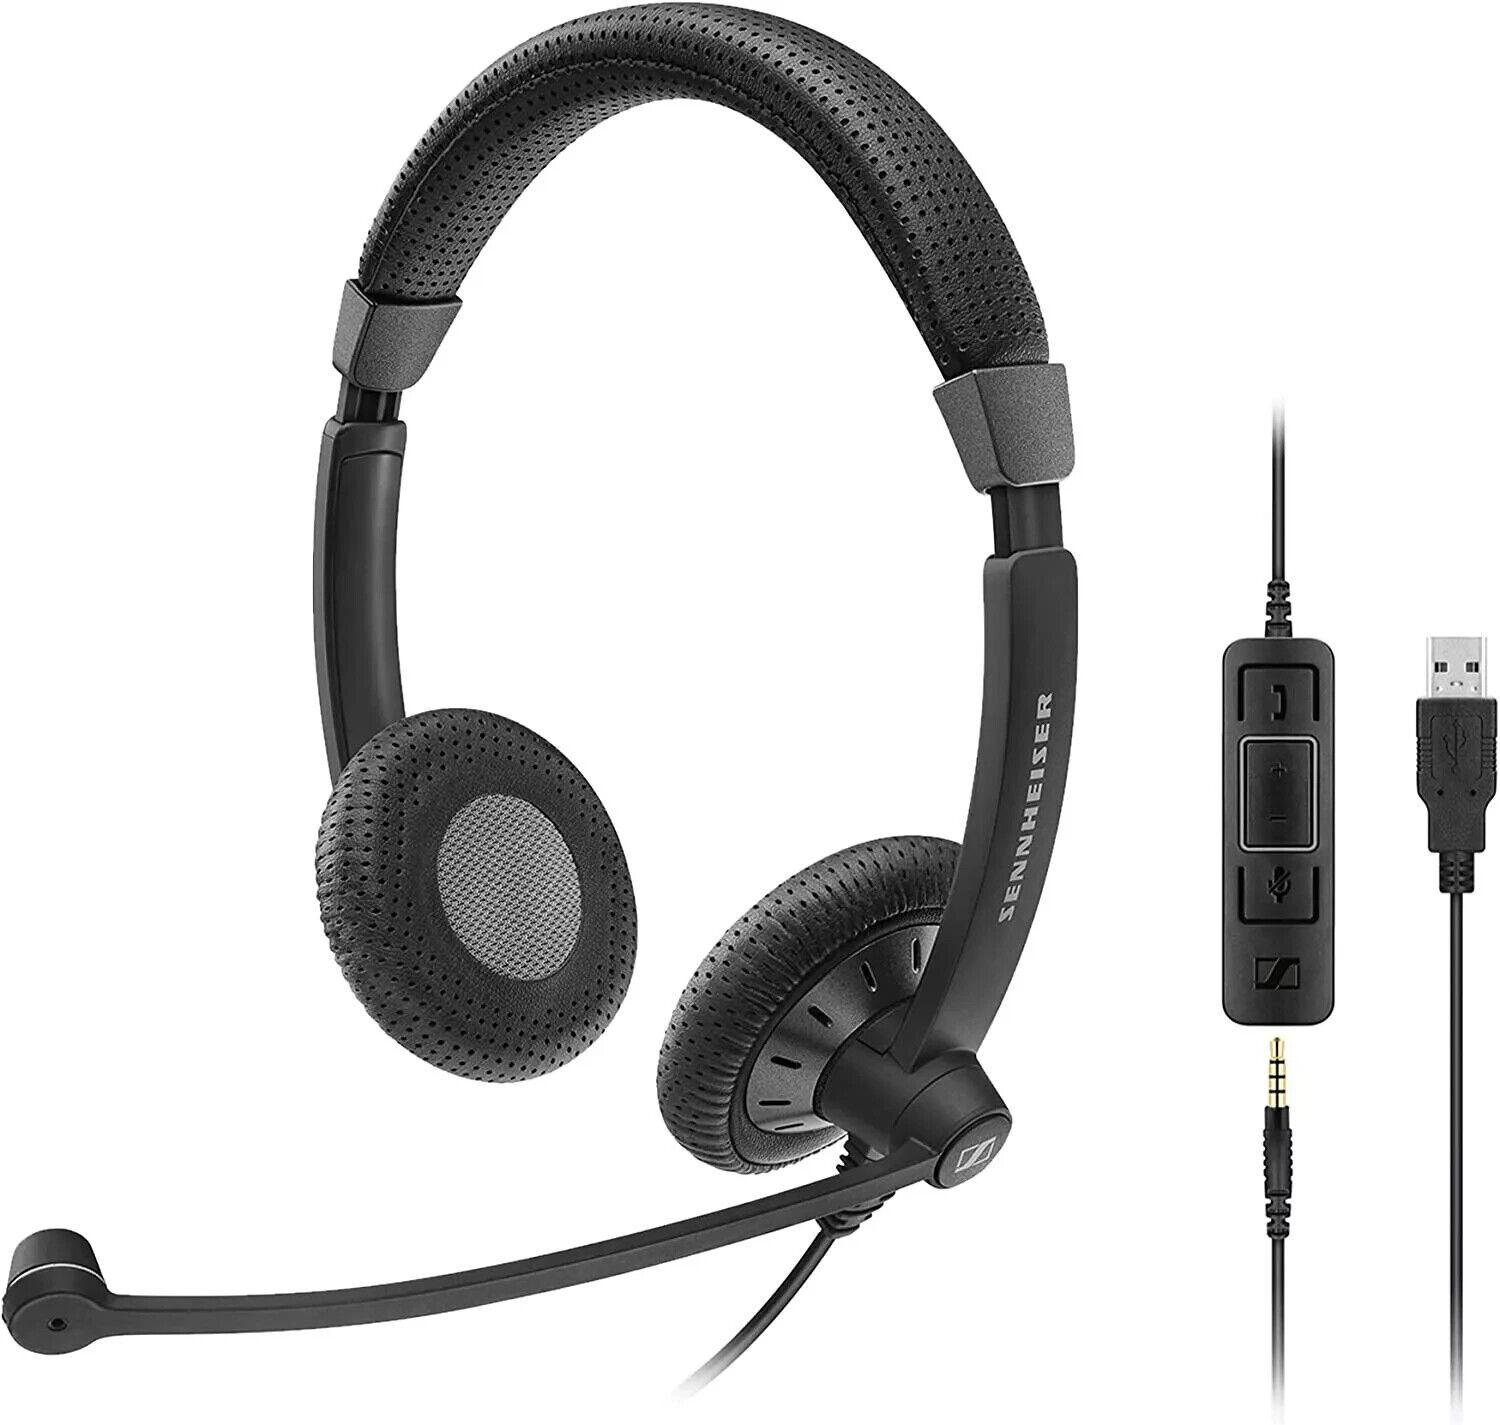 Sennheiser - SC 75 USB MS - Impact Double-Sided Headset with Microphone - Black